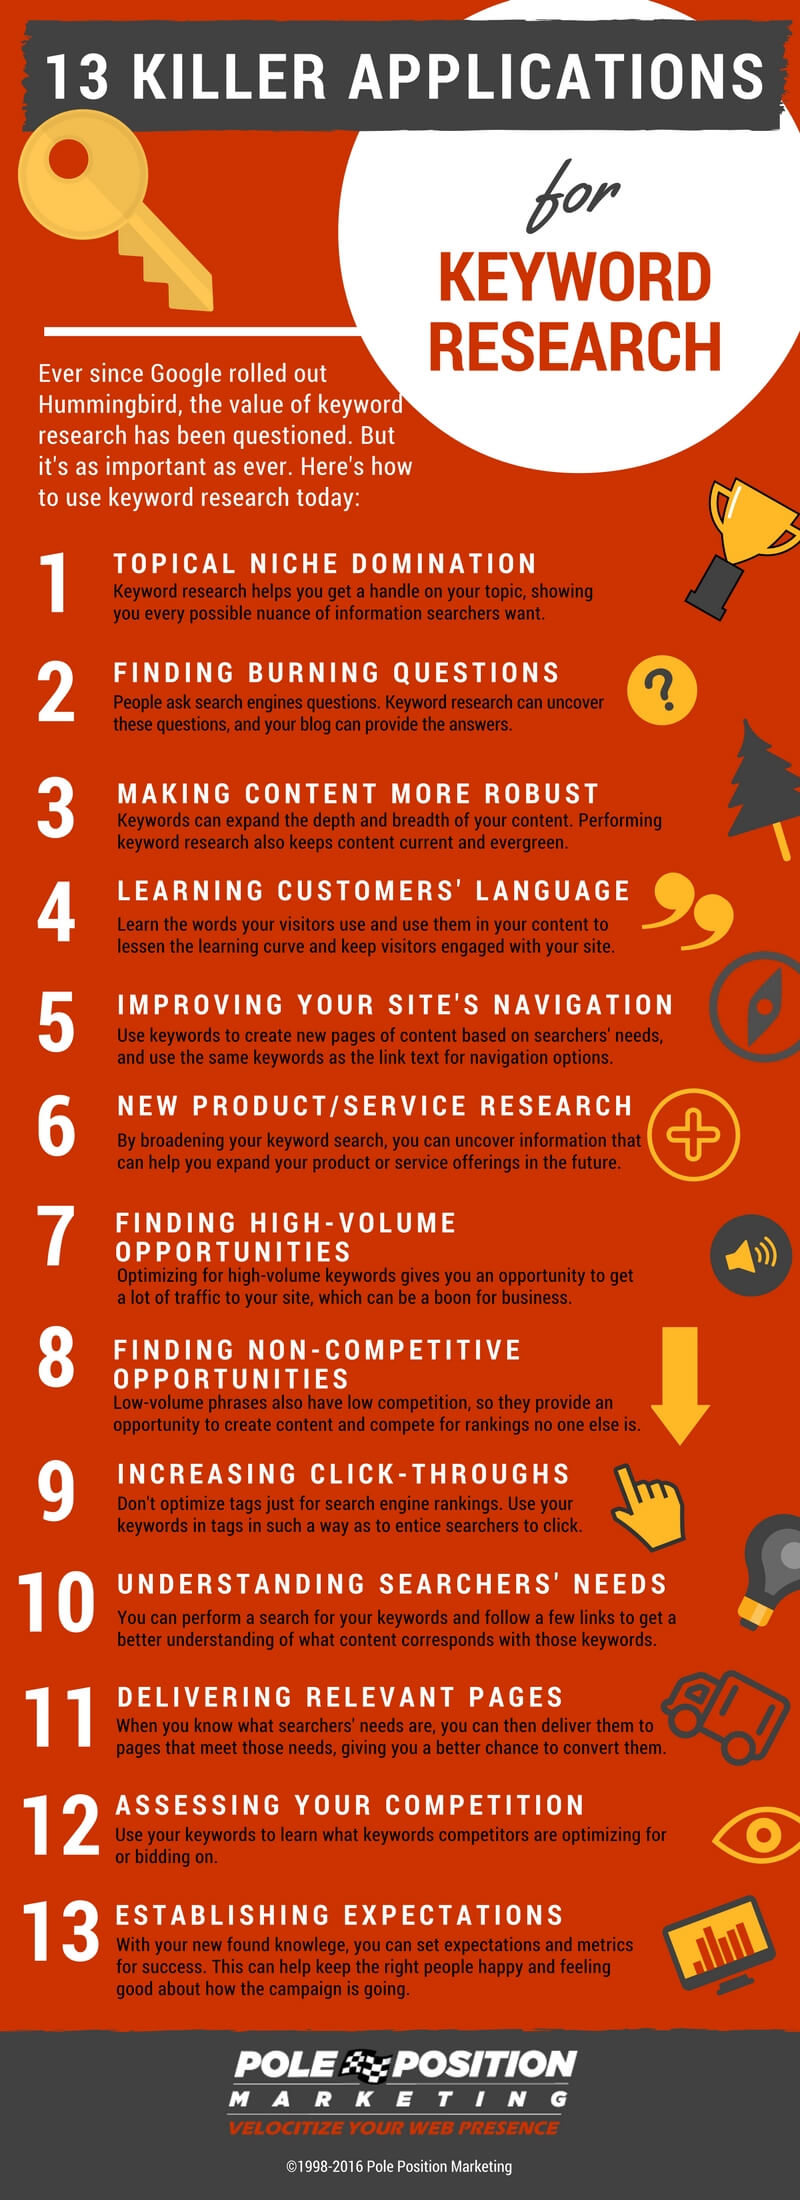 reasons-to-do-keyword-research-infographic